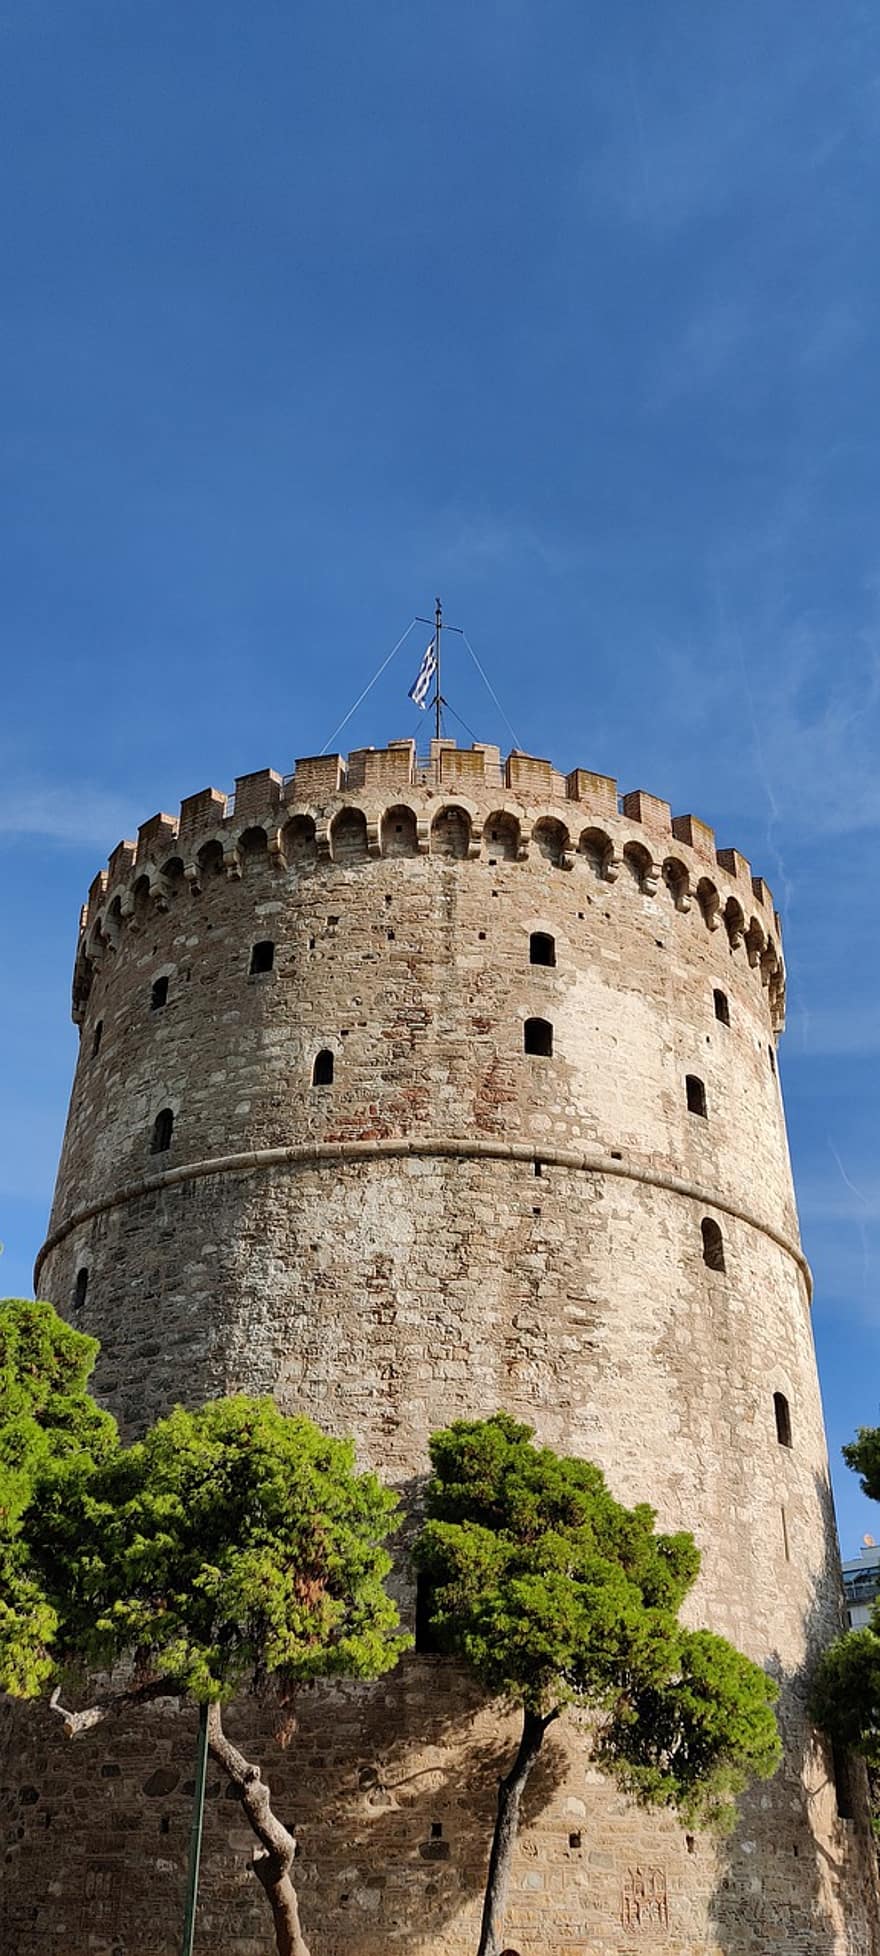 Tower, Building, Fort, Fortress, architecture, famous place, history, medieval, old, christianity, cultures